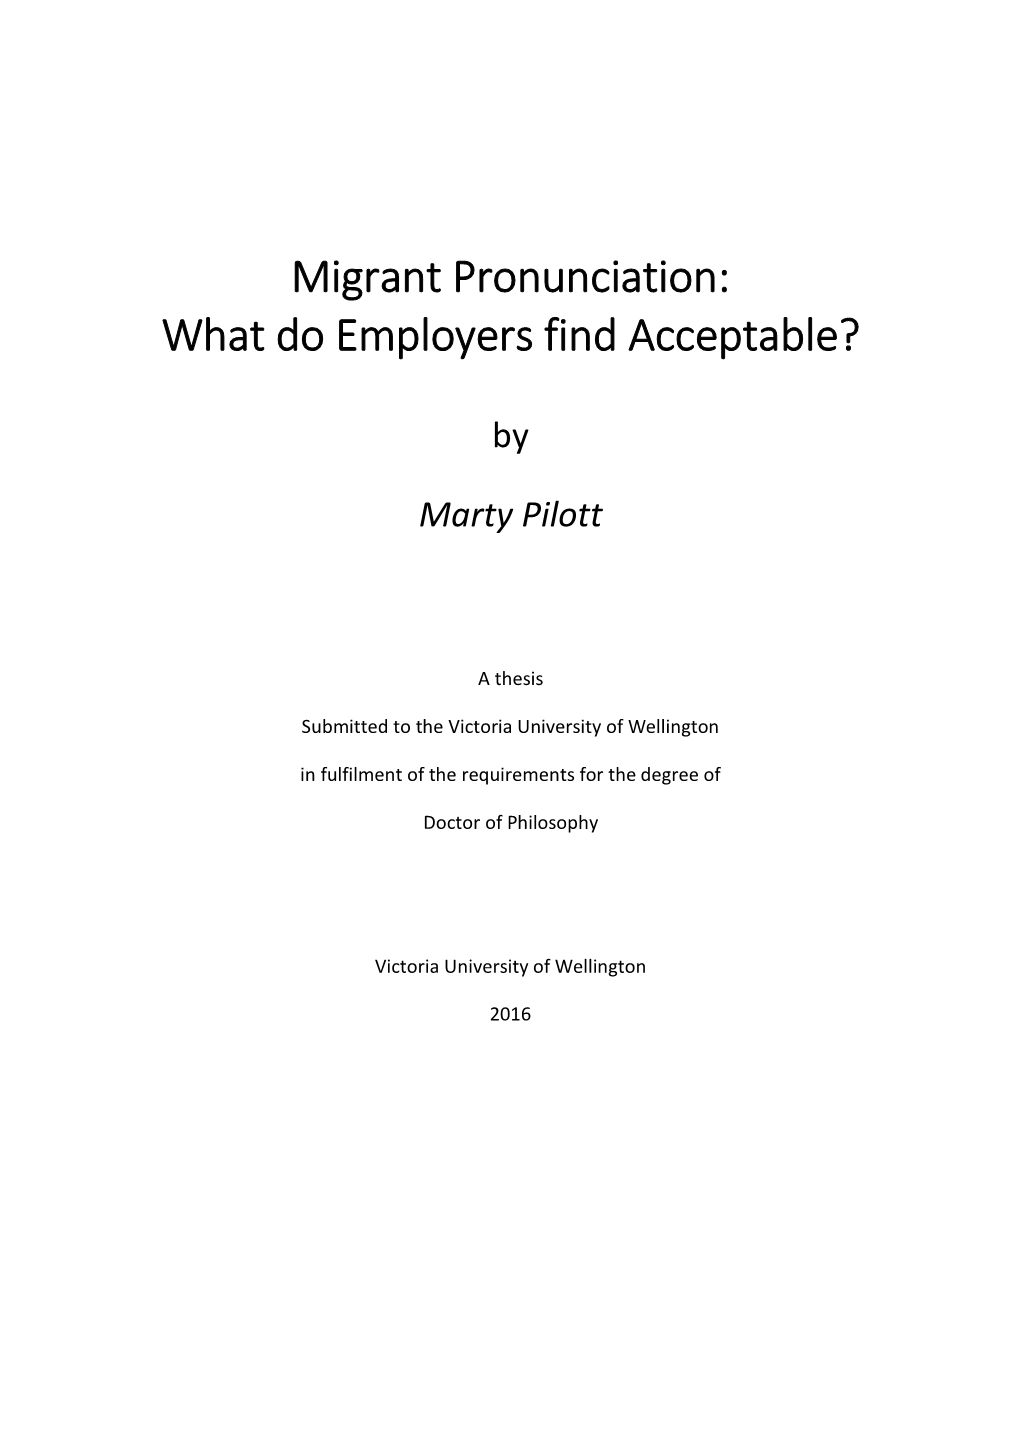 Migrant Pronunciation: What Do Employers Find Acceptable?